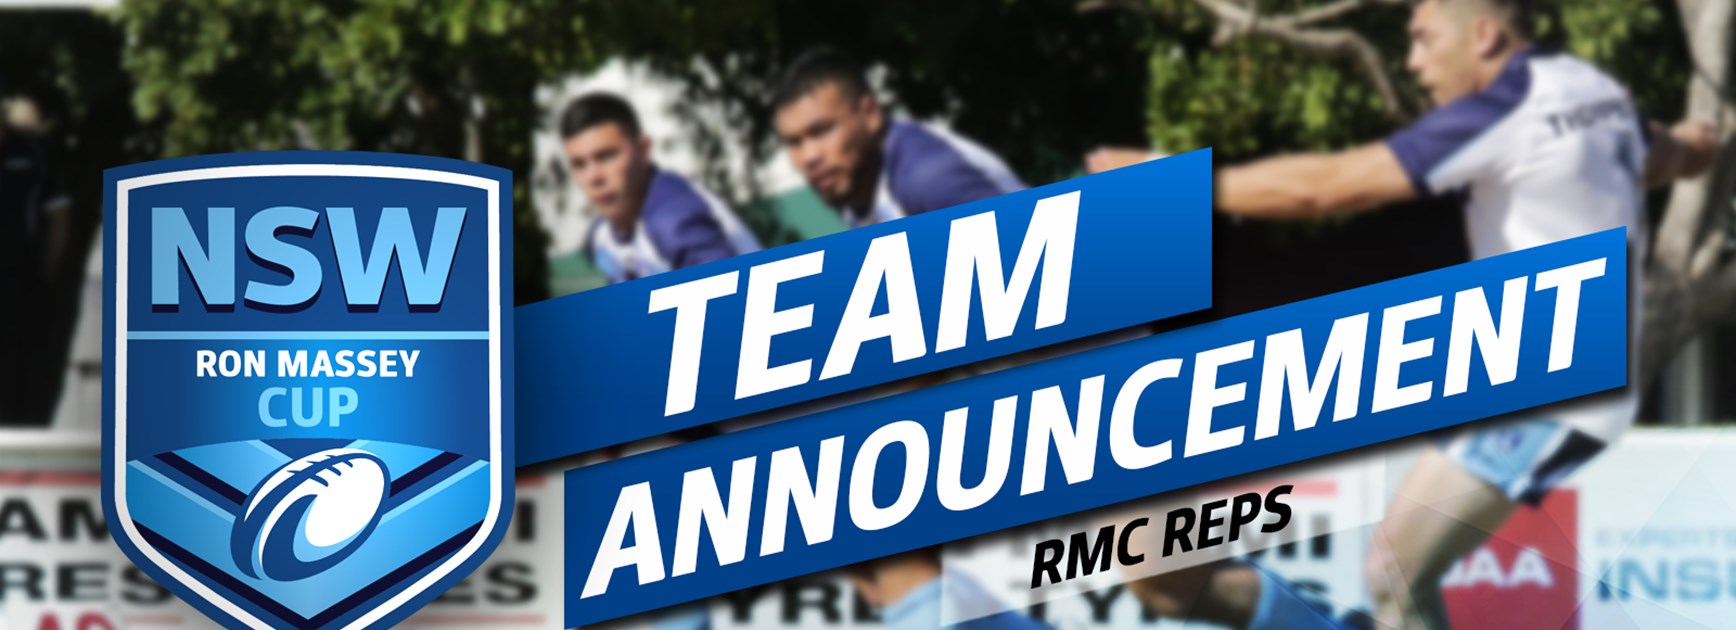 TEAM | RMC Reps